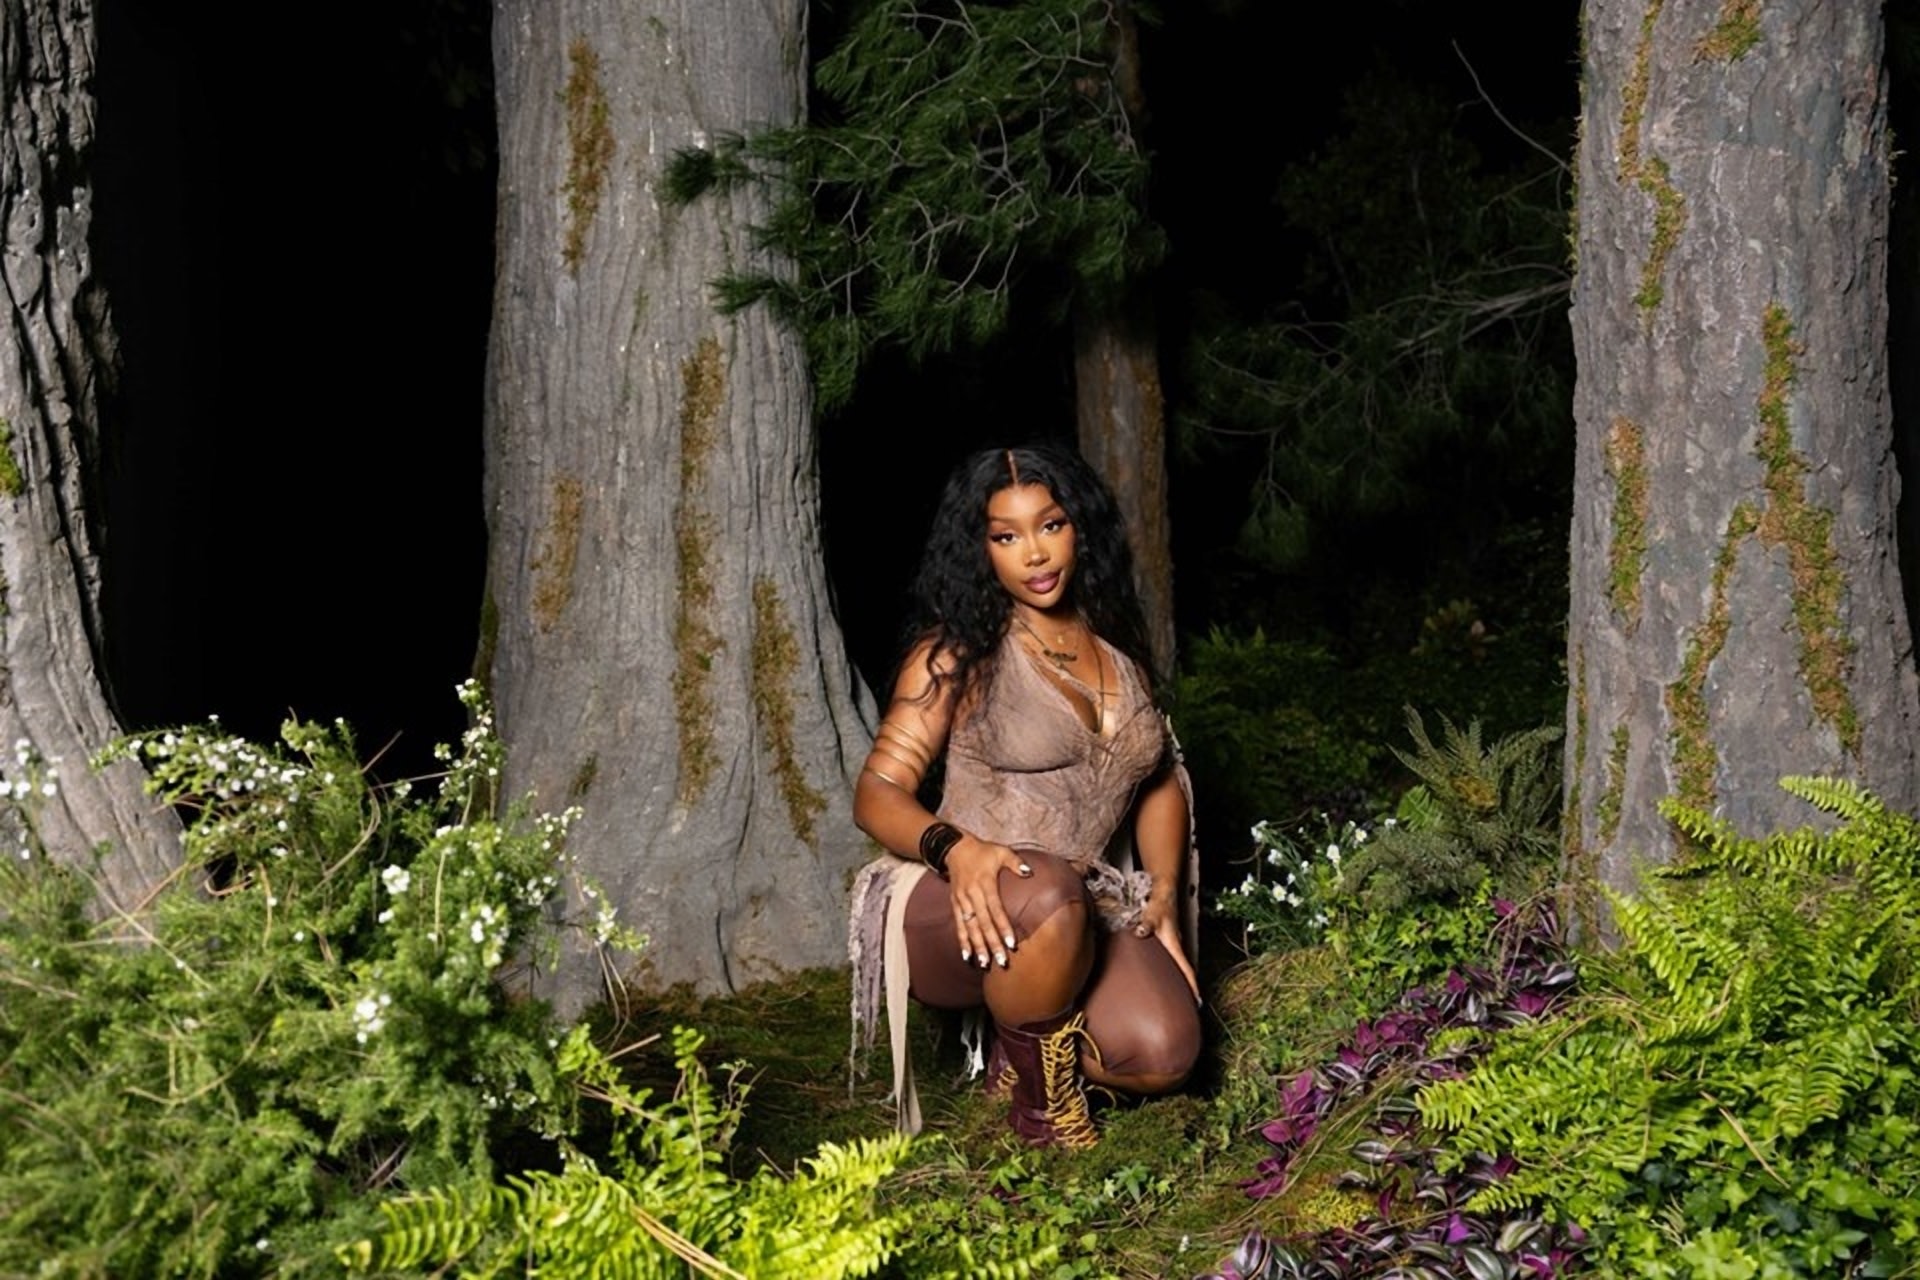 KnowESG_SZA sings for forests at GRAMMYs with Mastercard | ESG news